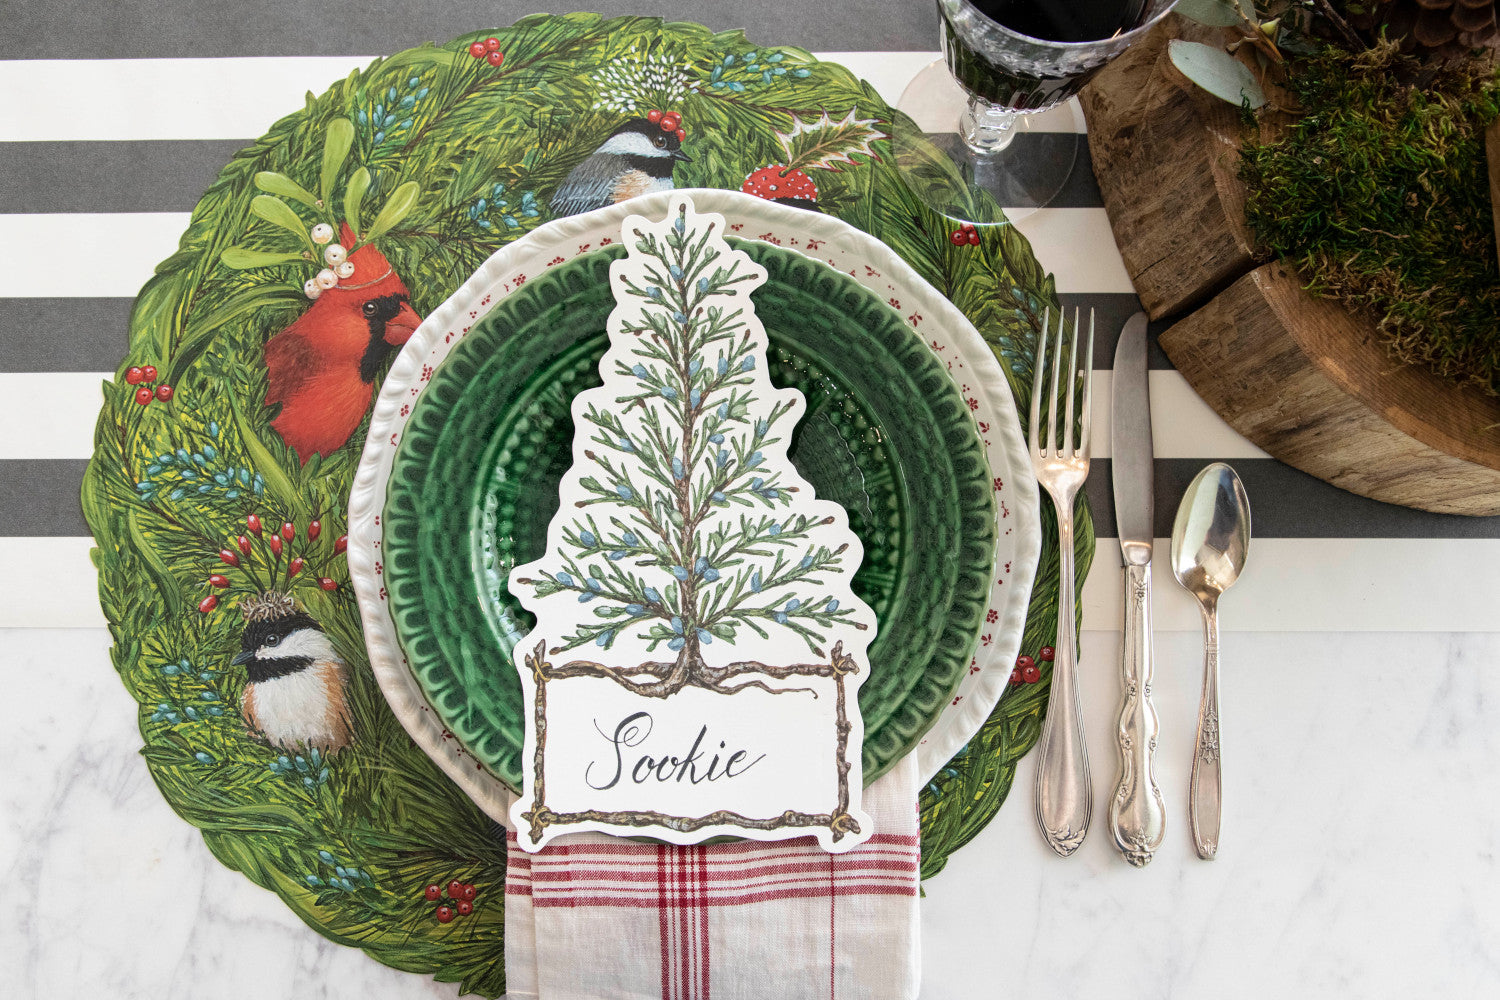 The Die-cut Winter Songbirds Placemat under a festive winter-themed place setting, from above.